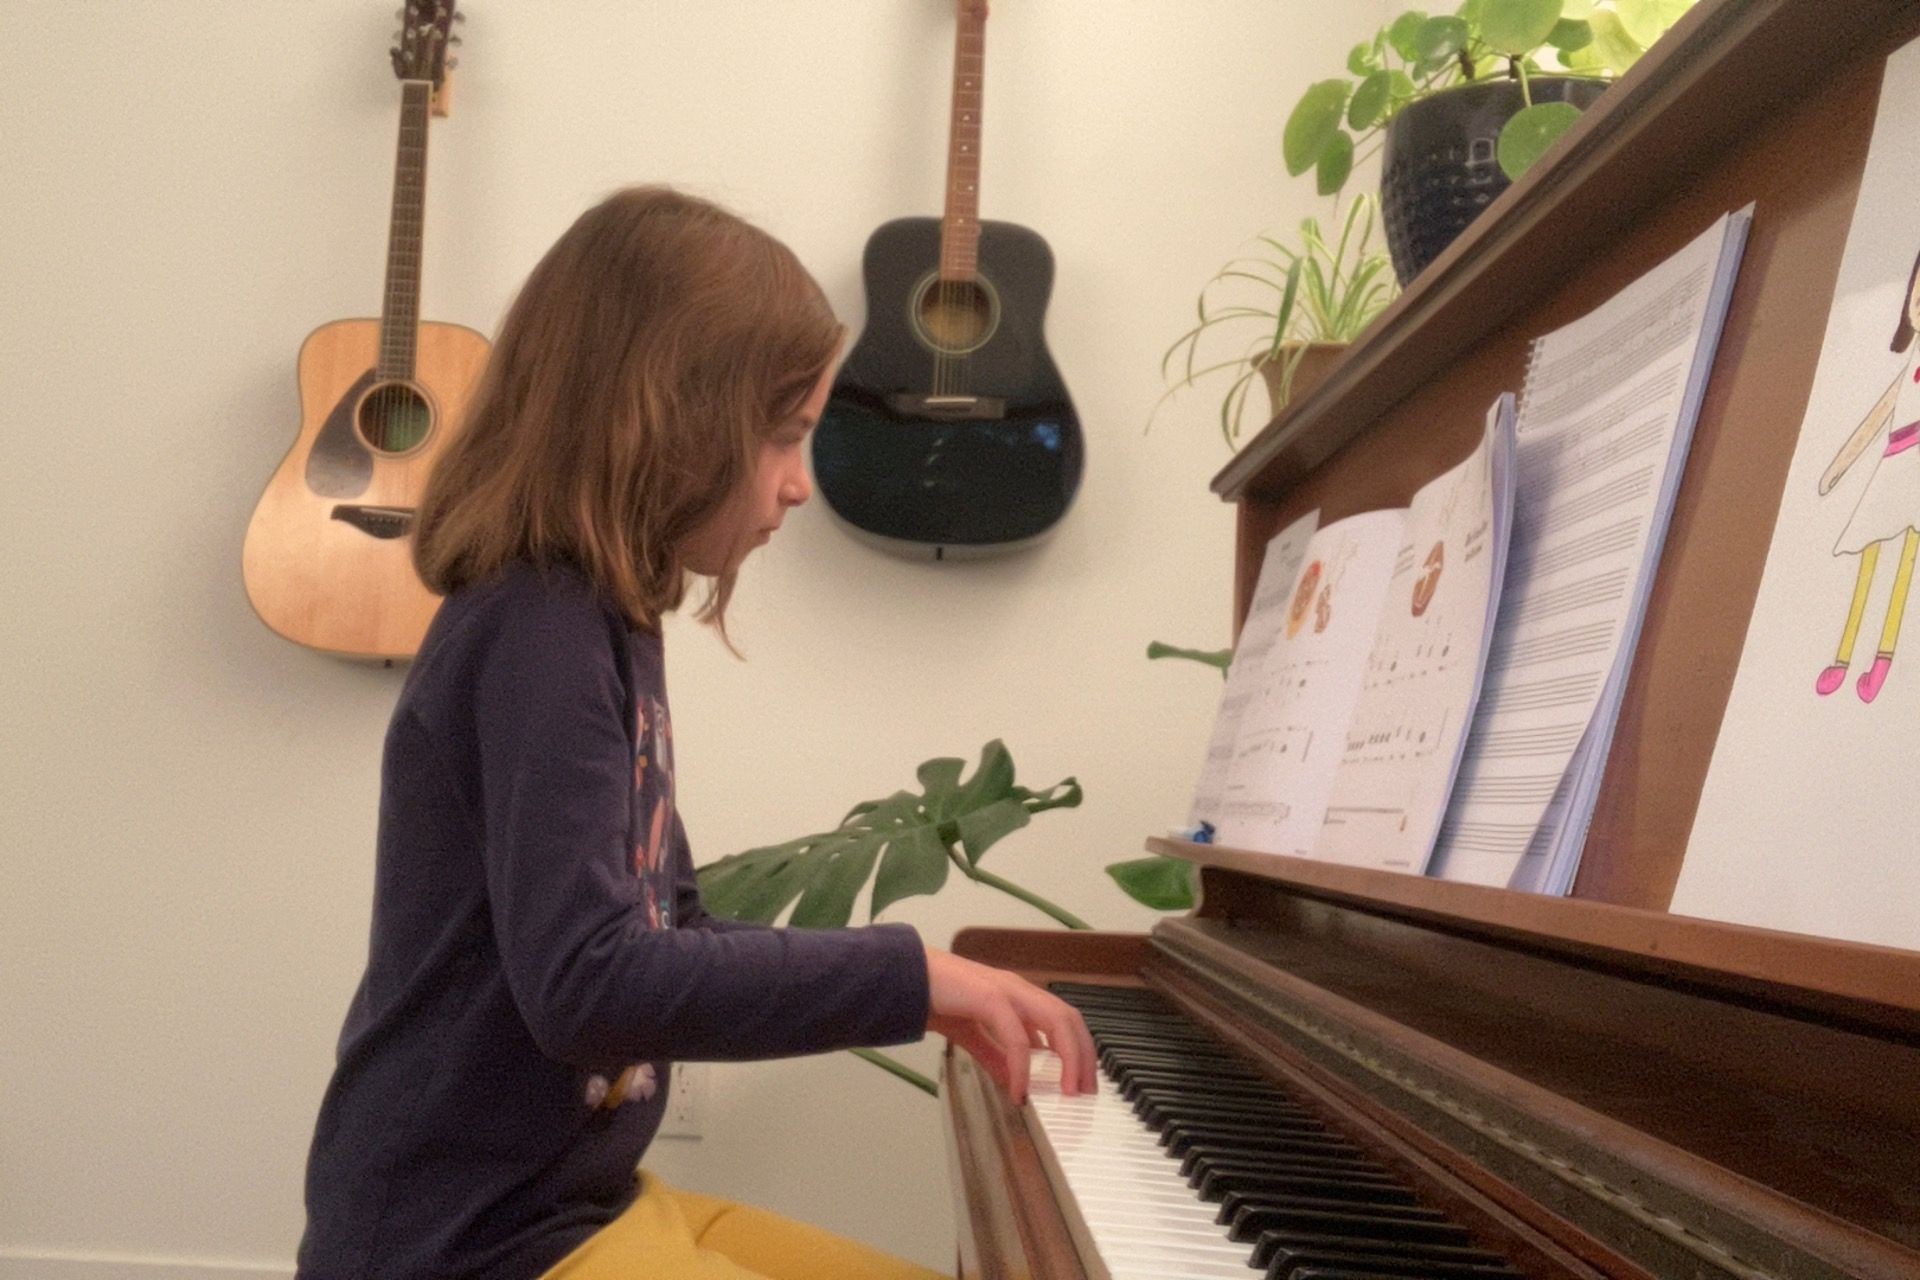 child playing piano during piano lesson, looking very focused and ready leaning in a bit with very round hands on the keys and guitars in the background